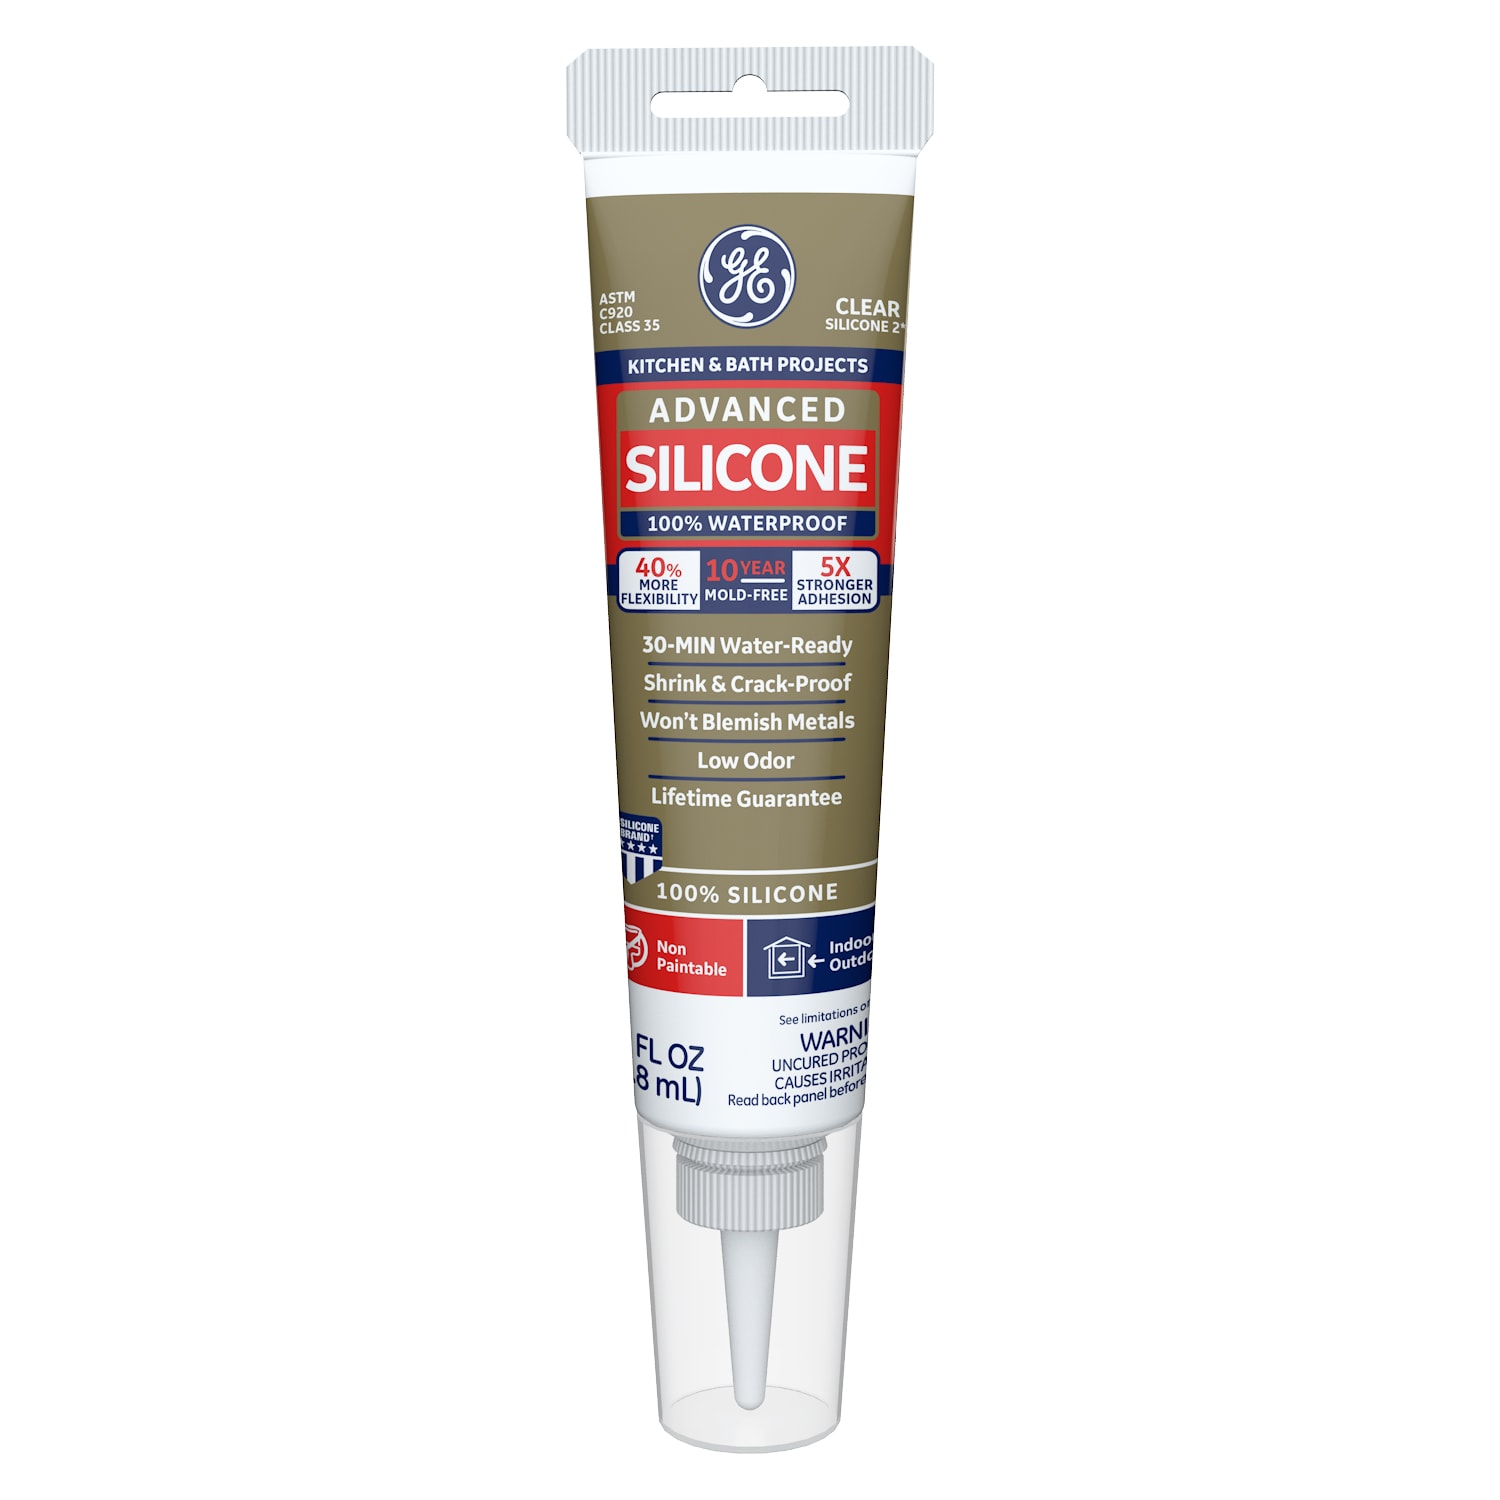 Clear Sealant: Waterproof Transparent Adiseal Better Than Silicone